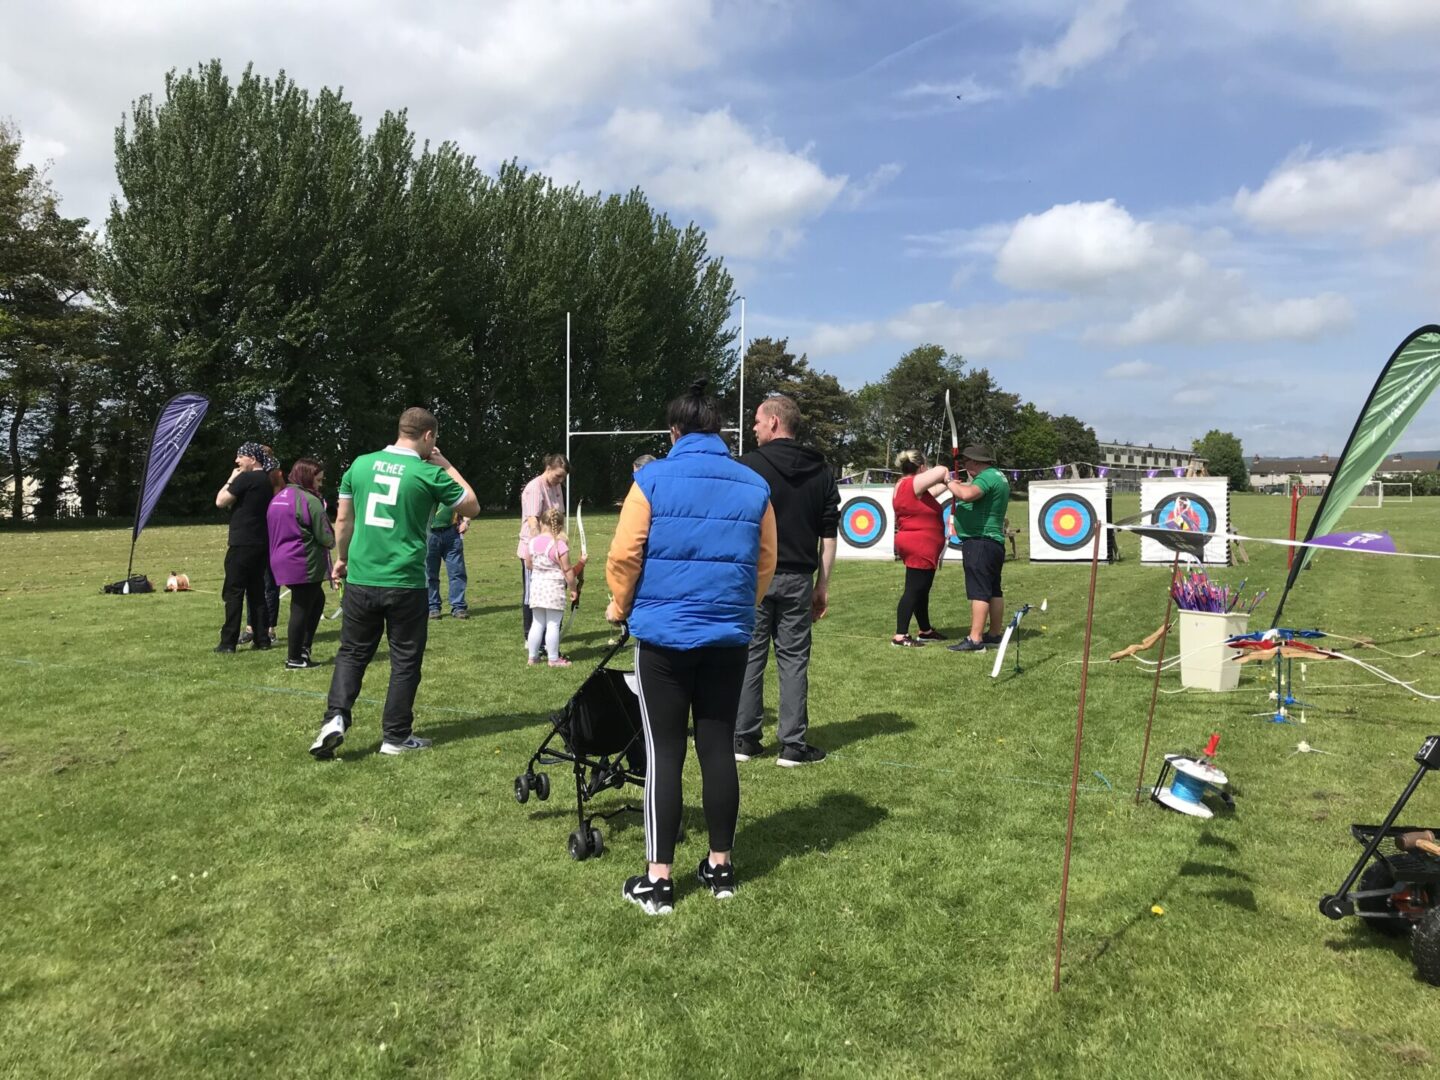 Archers at the Start Archery Week event